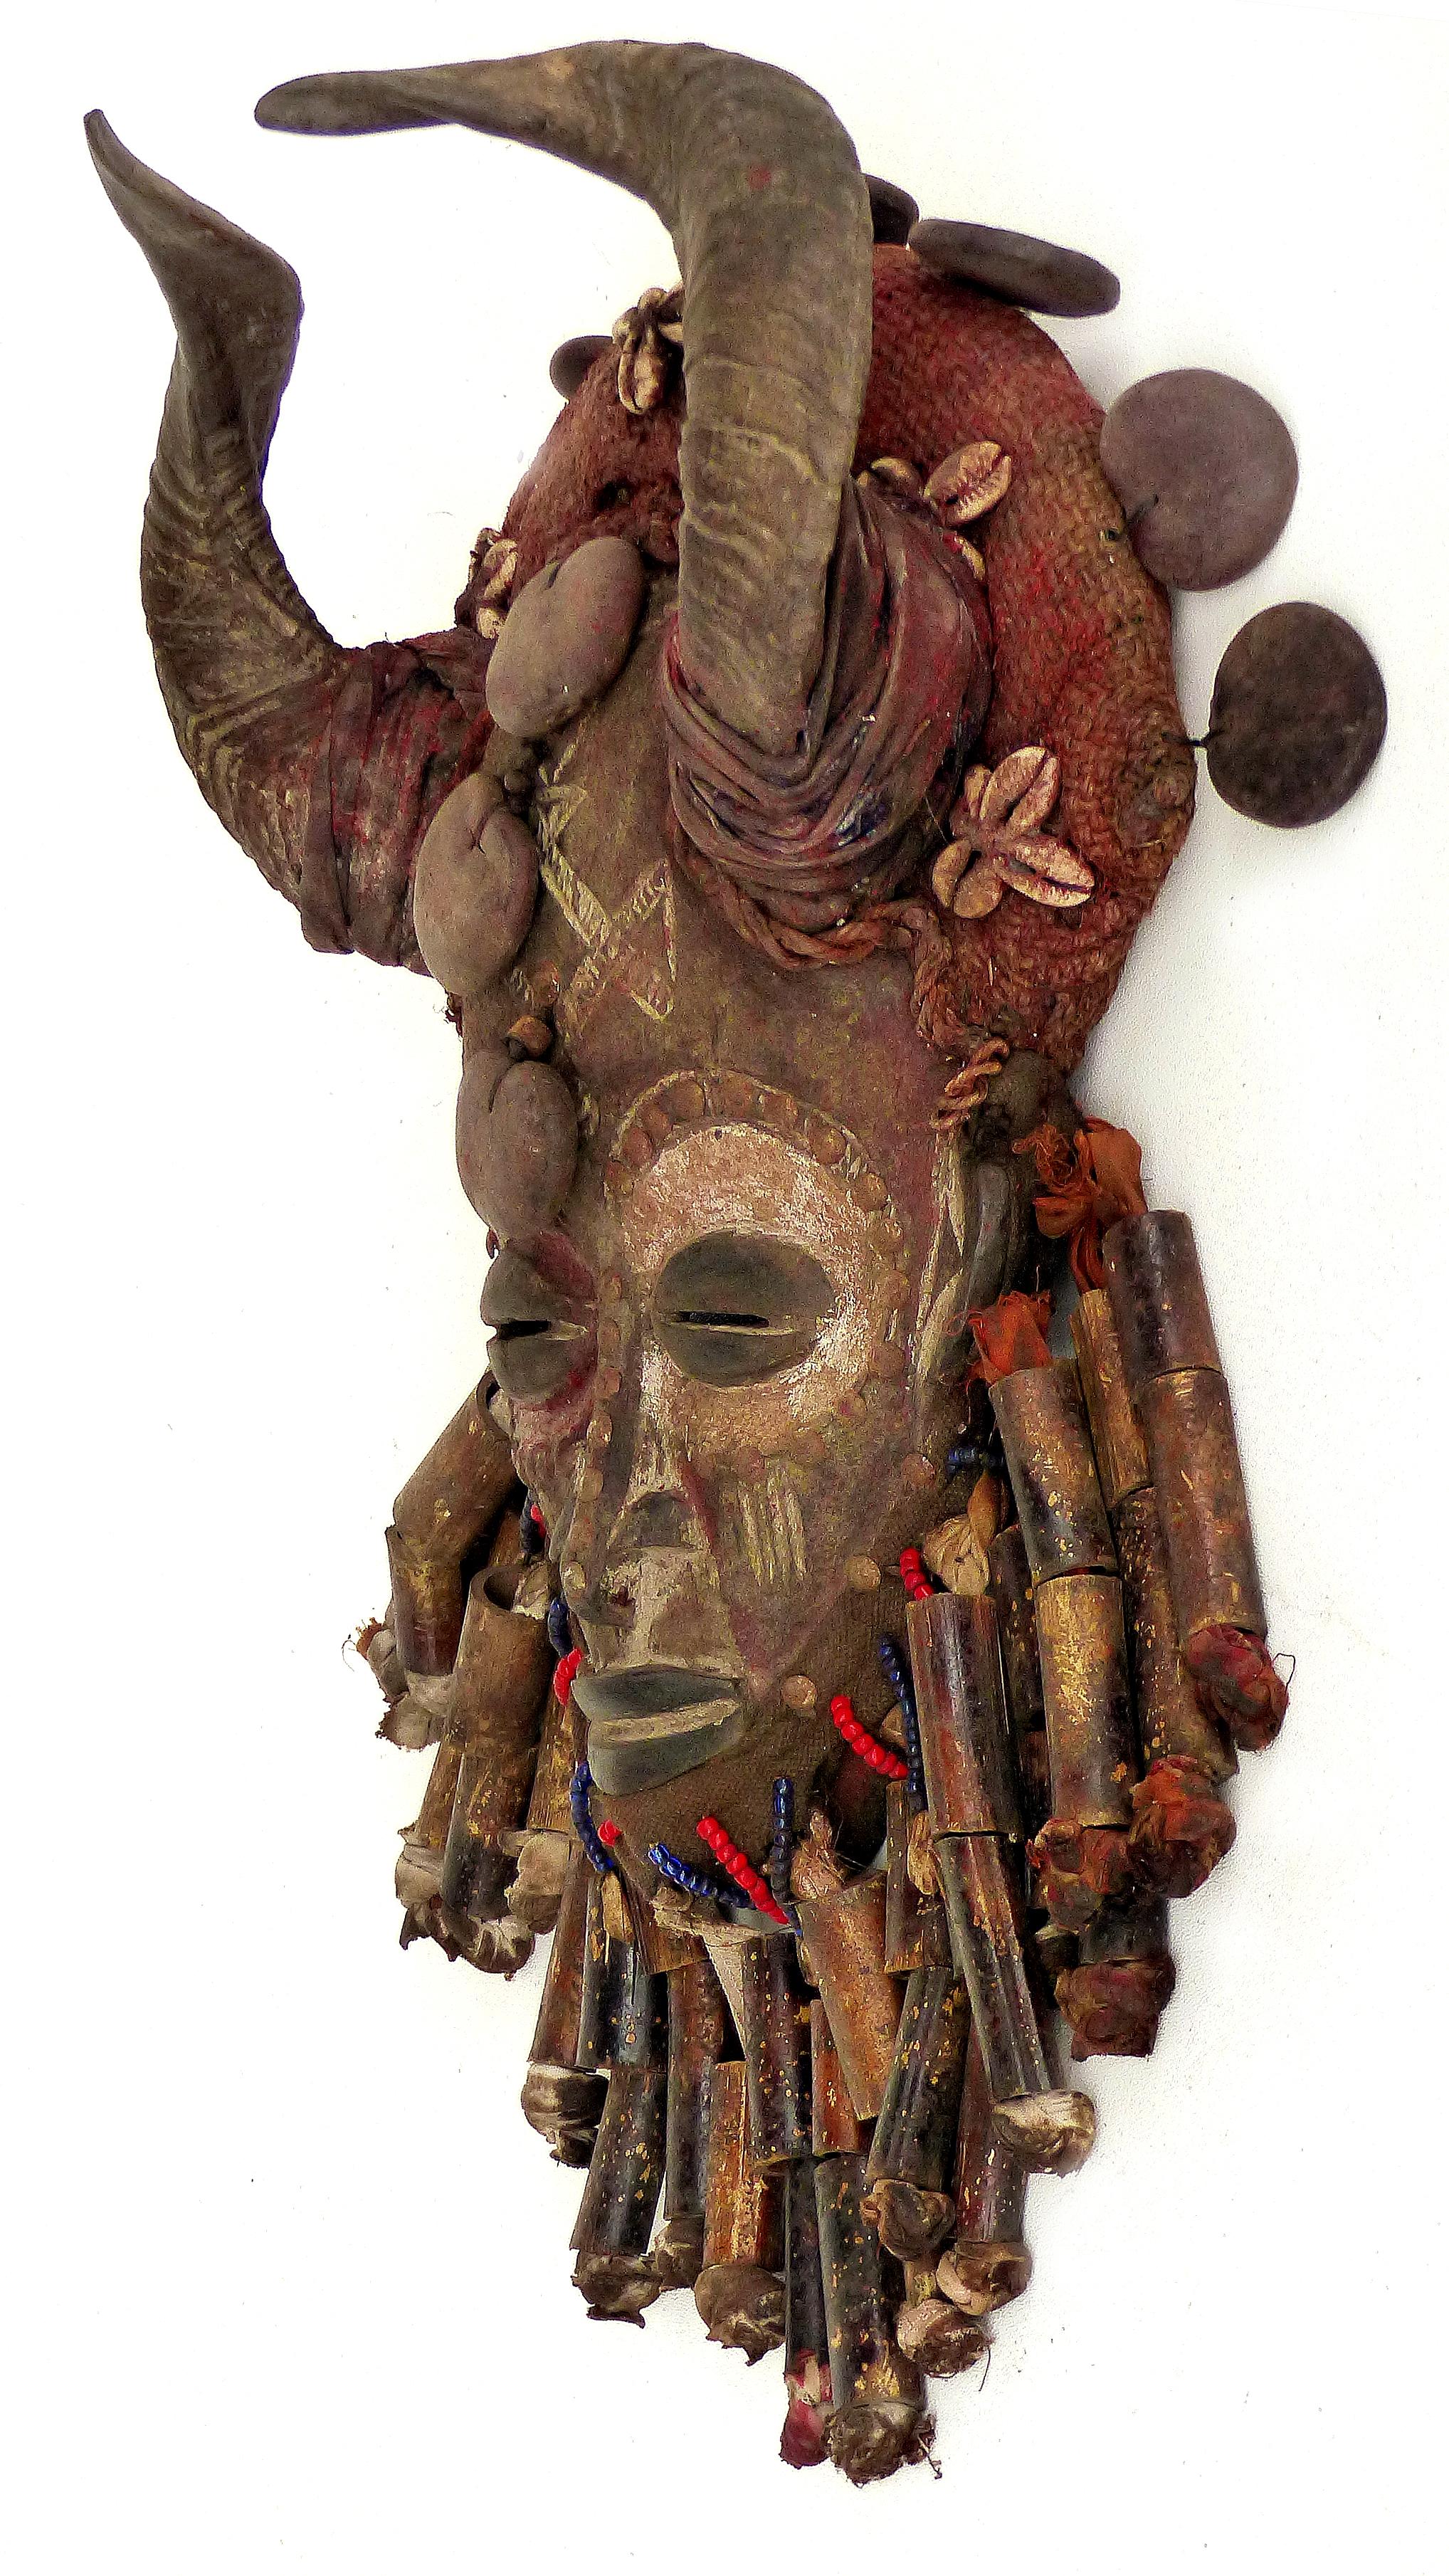 African Bamileke Tribal Mask from Cameroon with Horns

Offered for sale is a decorative carved mask from the Bamileke people of Cameroon, Africa, This interesting and unusual horned mask is embellished with beads, a bamboo beard, cowry shells and